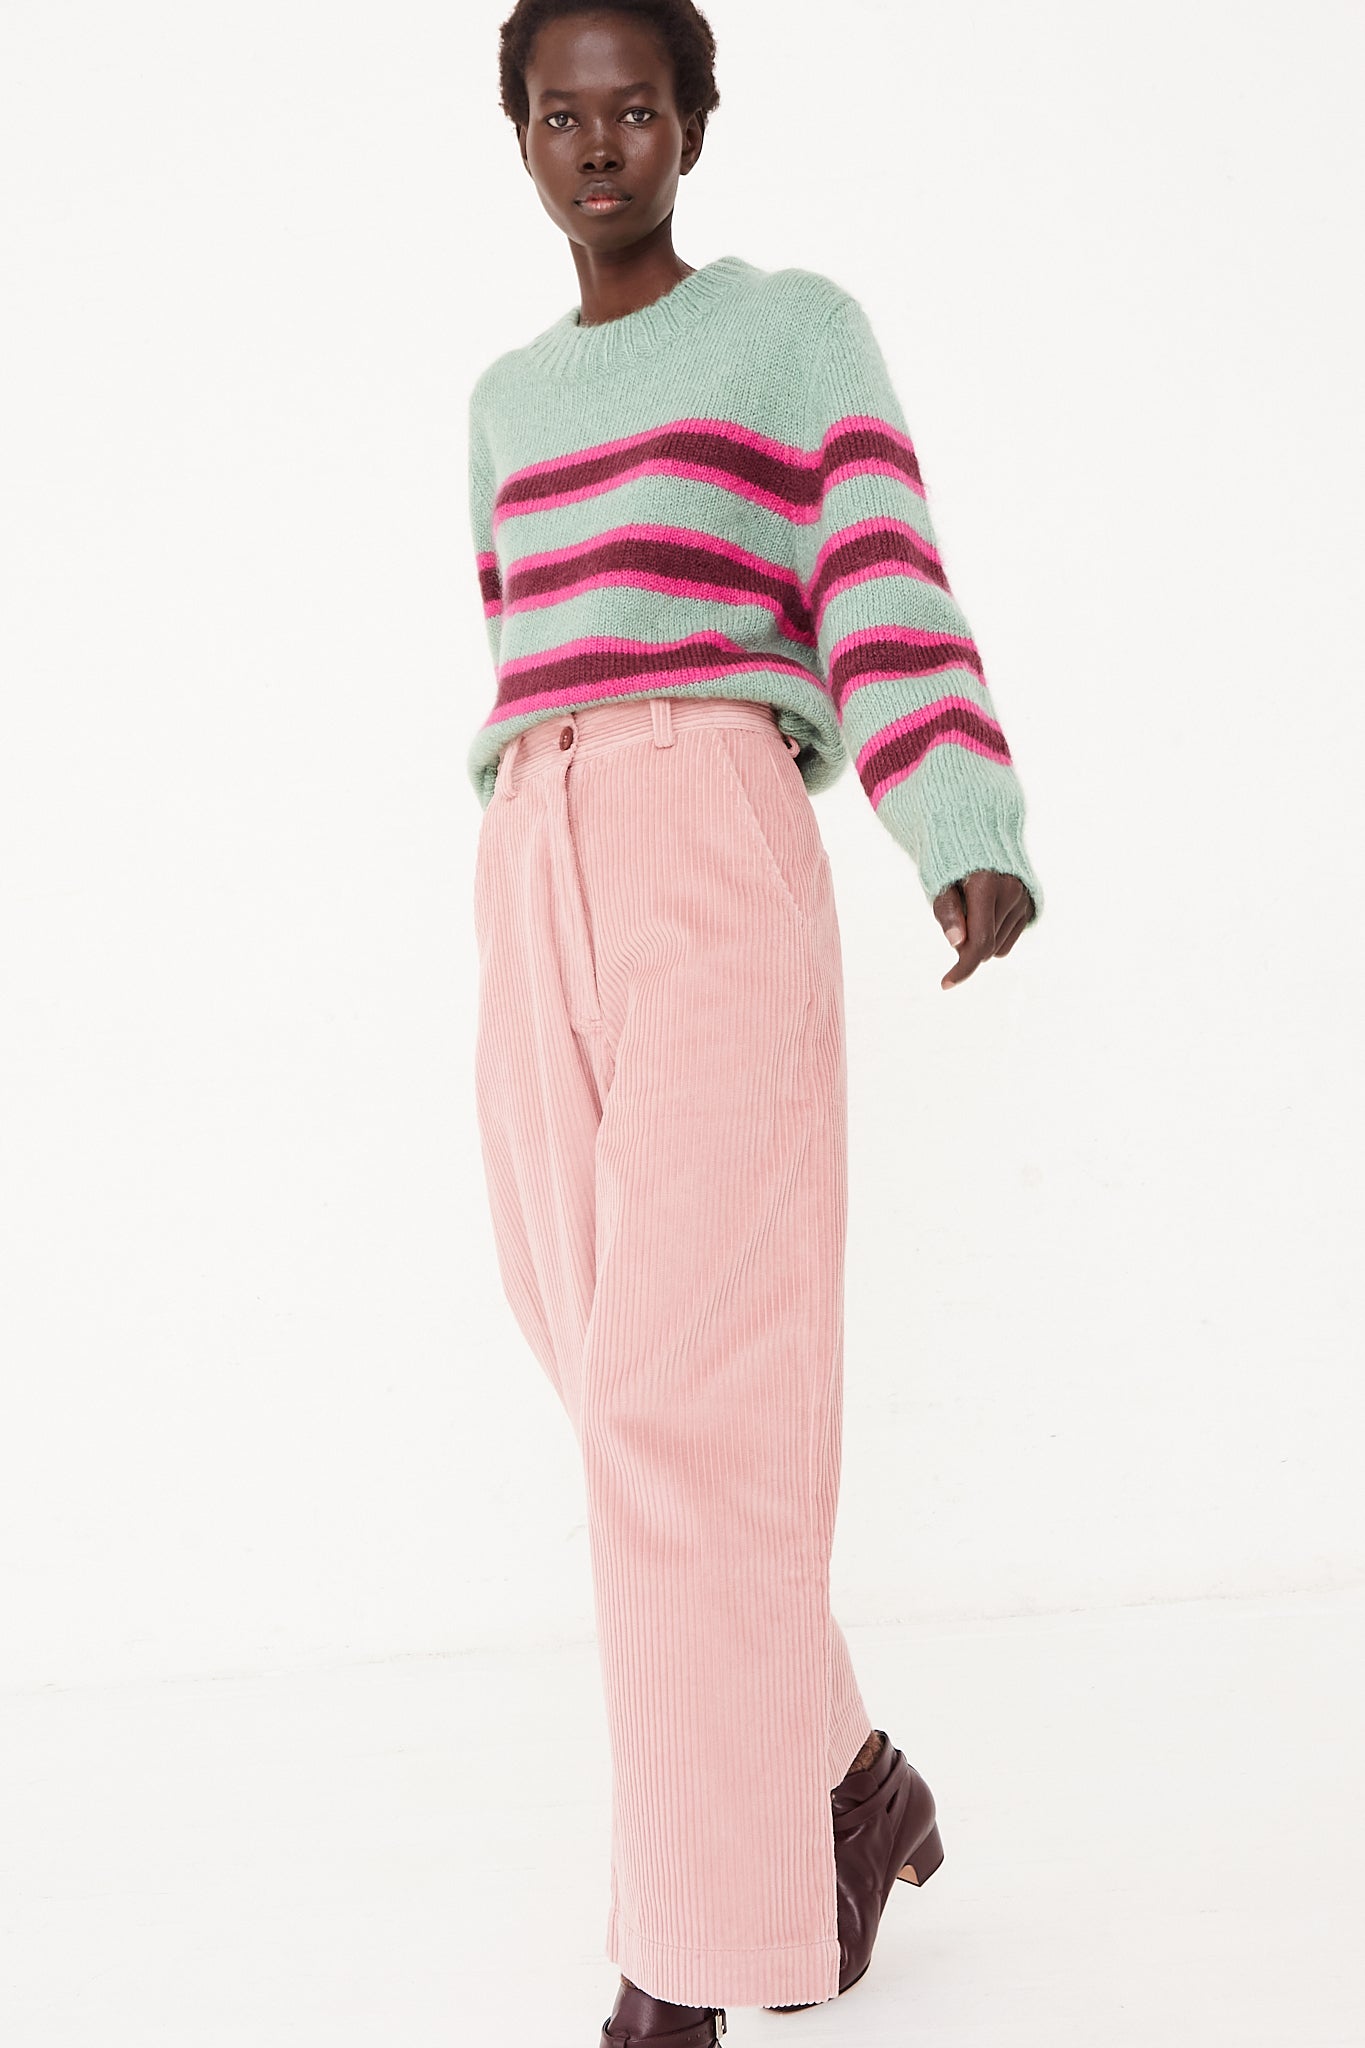 Corduroy Andes Pant in Blush